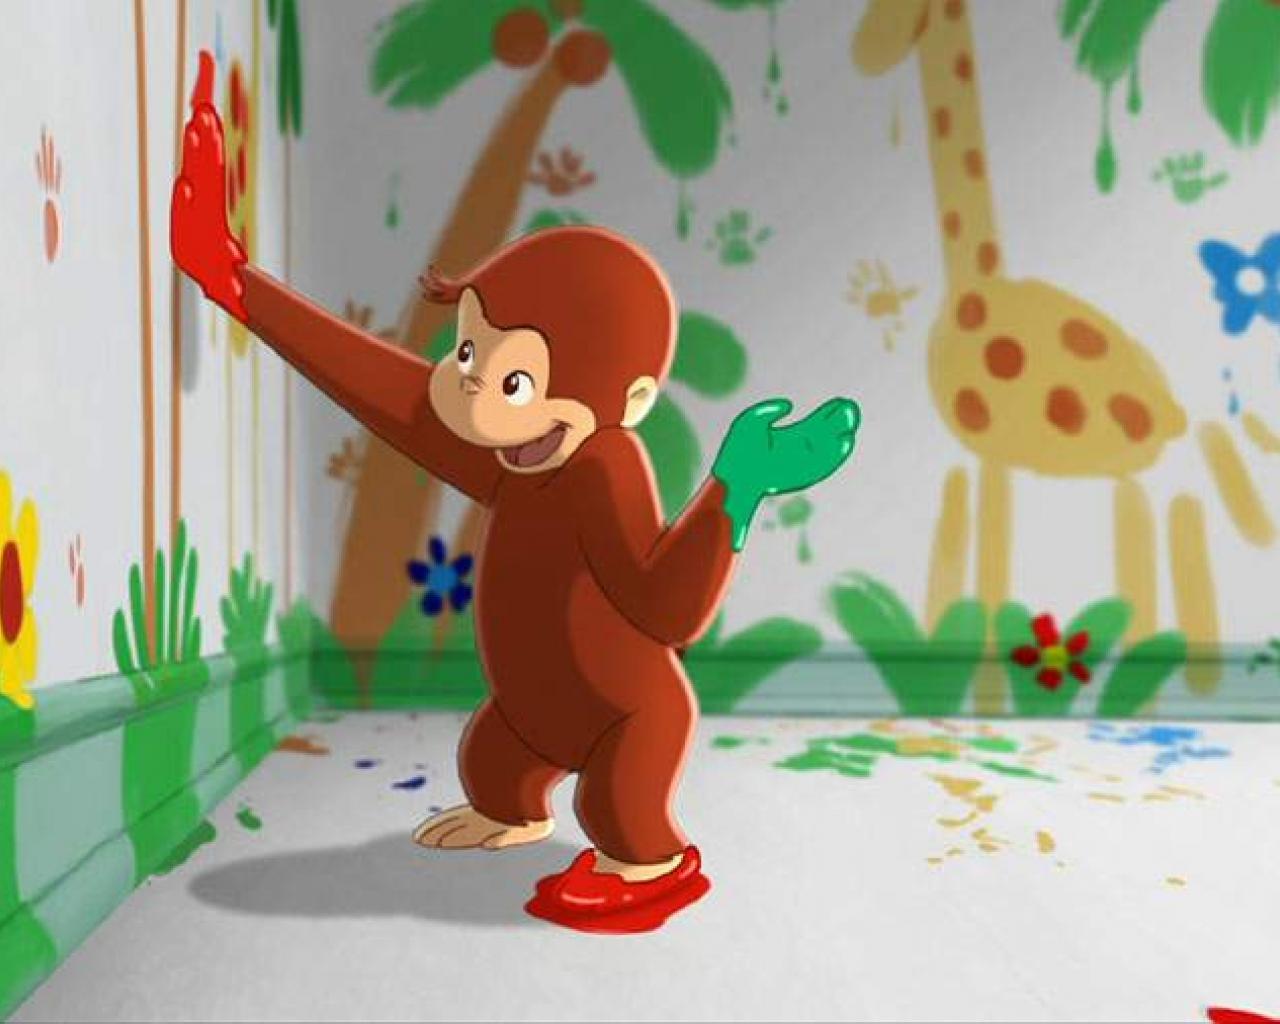 Download 240x320 Wallpaper Curious George Animated Movie 2016 Movie  Monkey Old Mobile Cell Phone Smartphone 240x320 Hd Image Background  9021